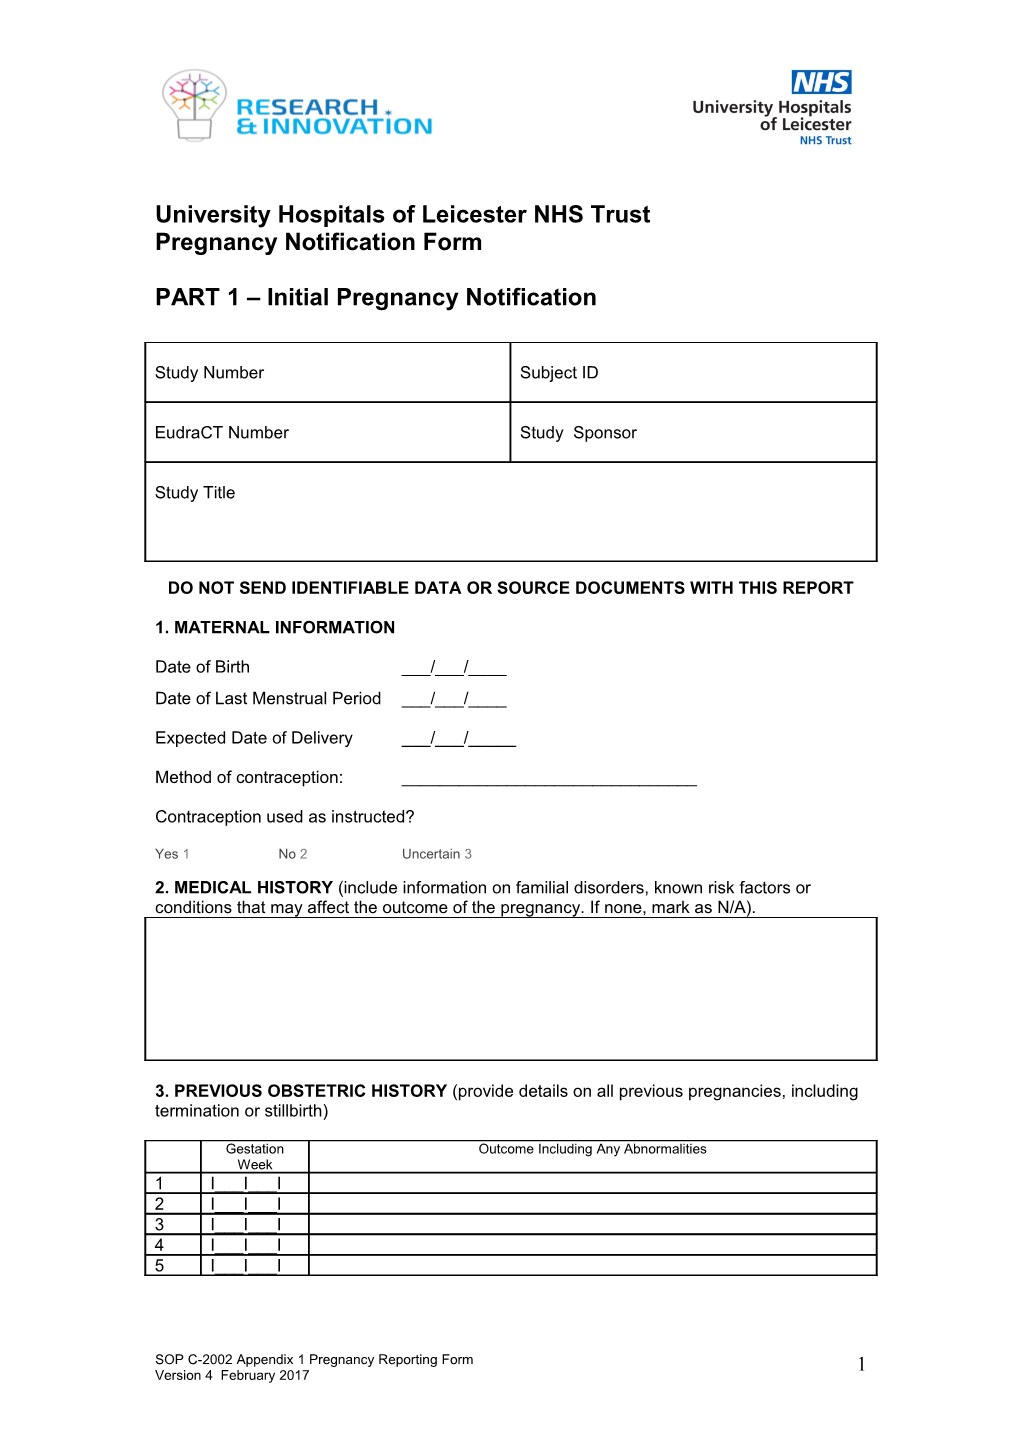 University Hospitals of Leicester NHS Trust-Pregnancy Notification Form